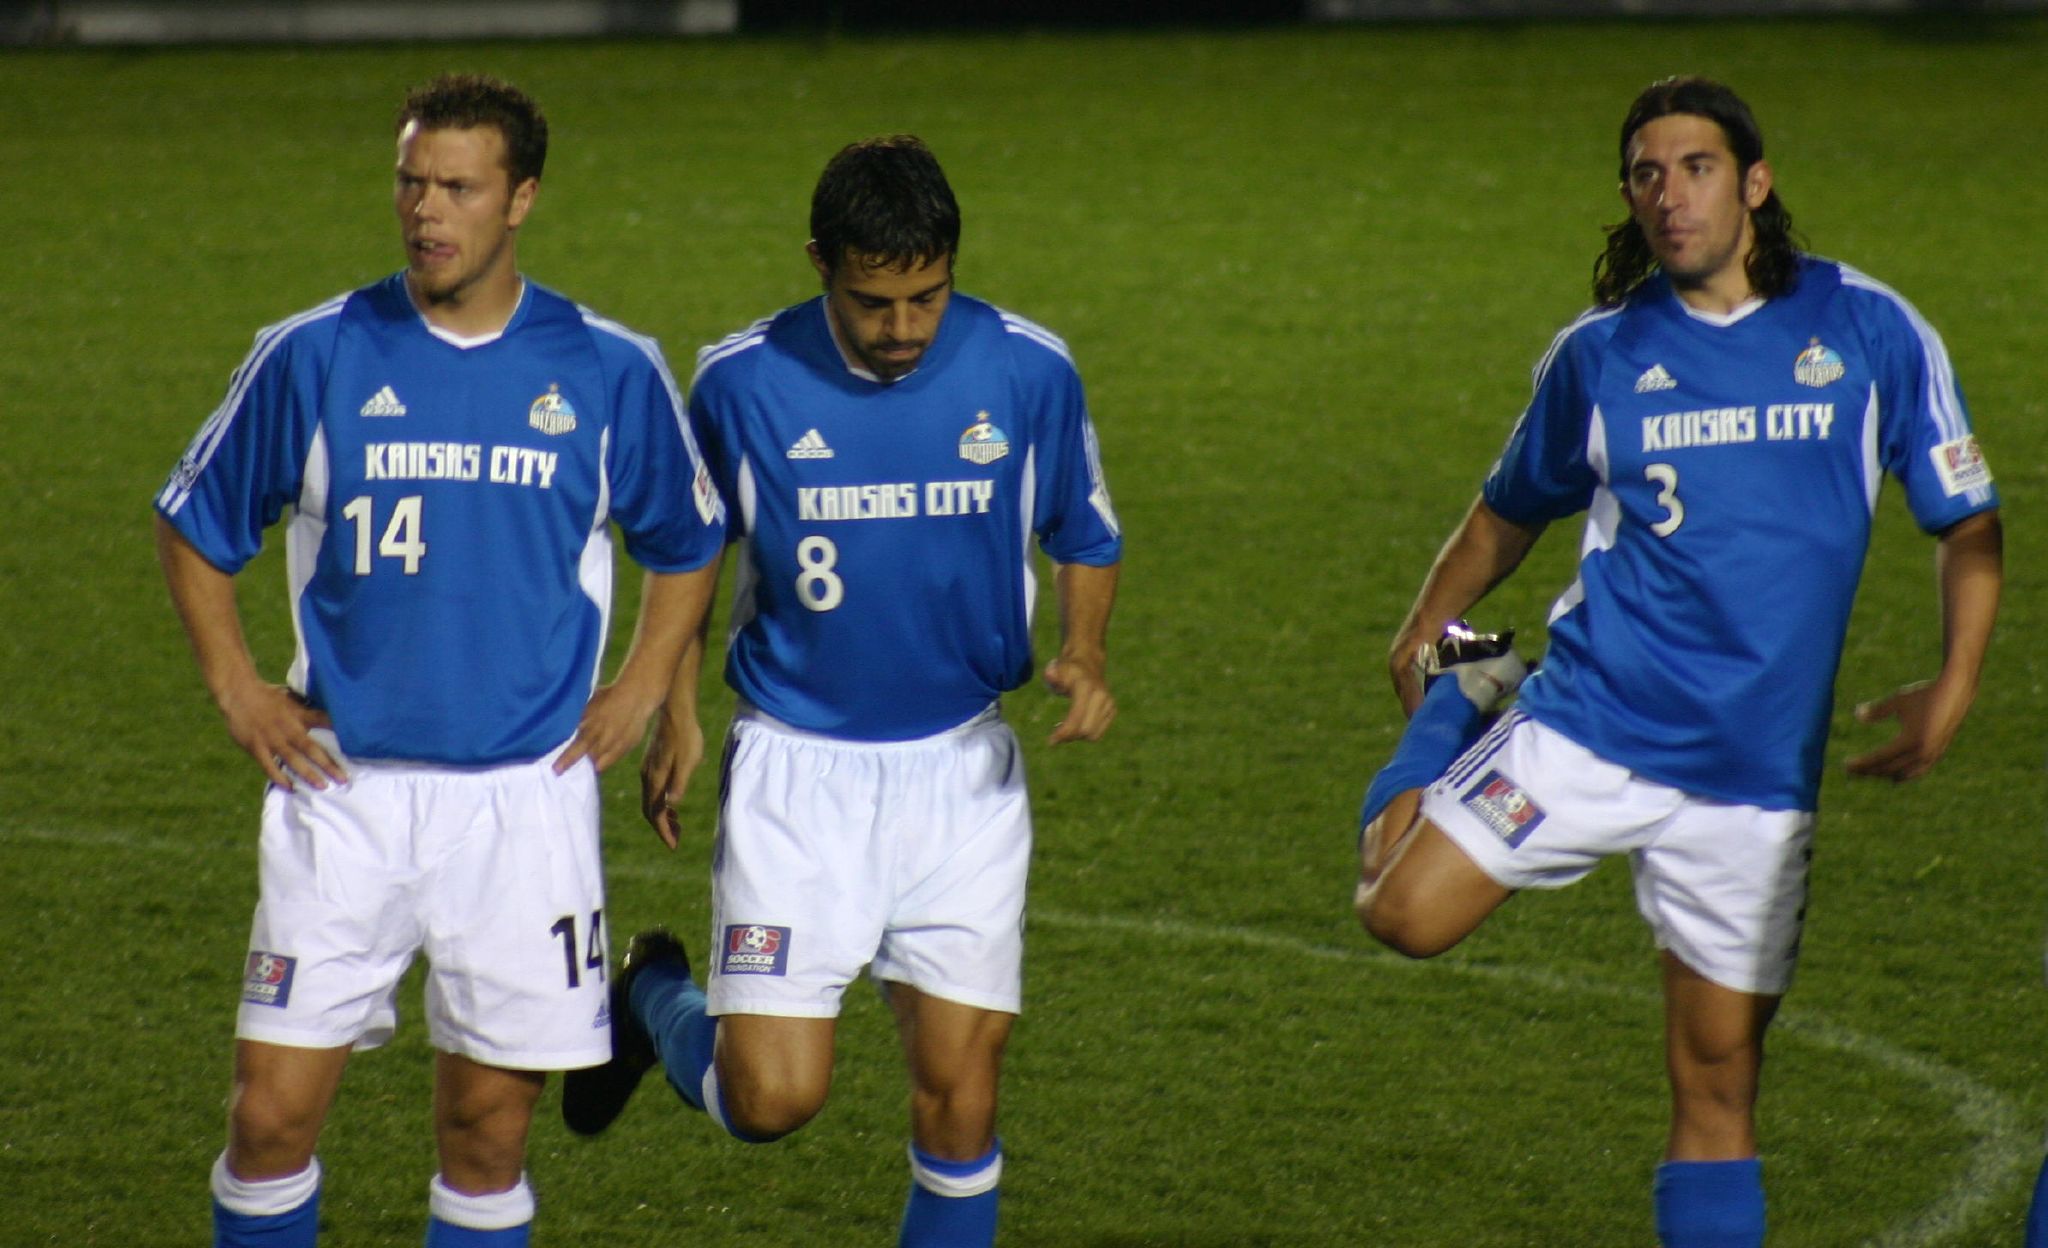 three soccer players with knee pads and shorts walking on the field